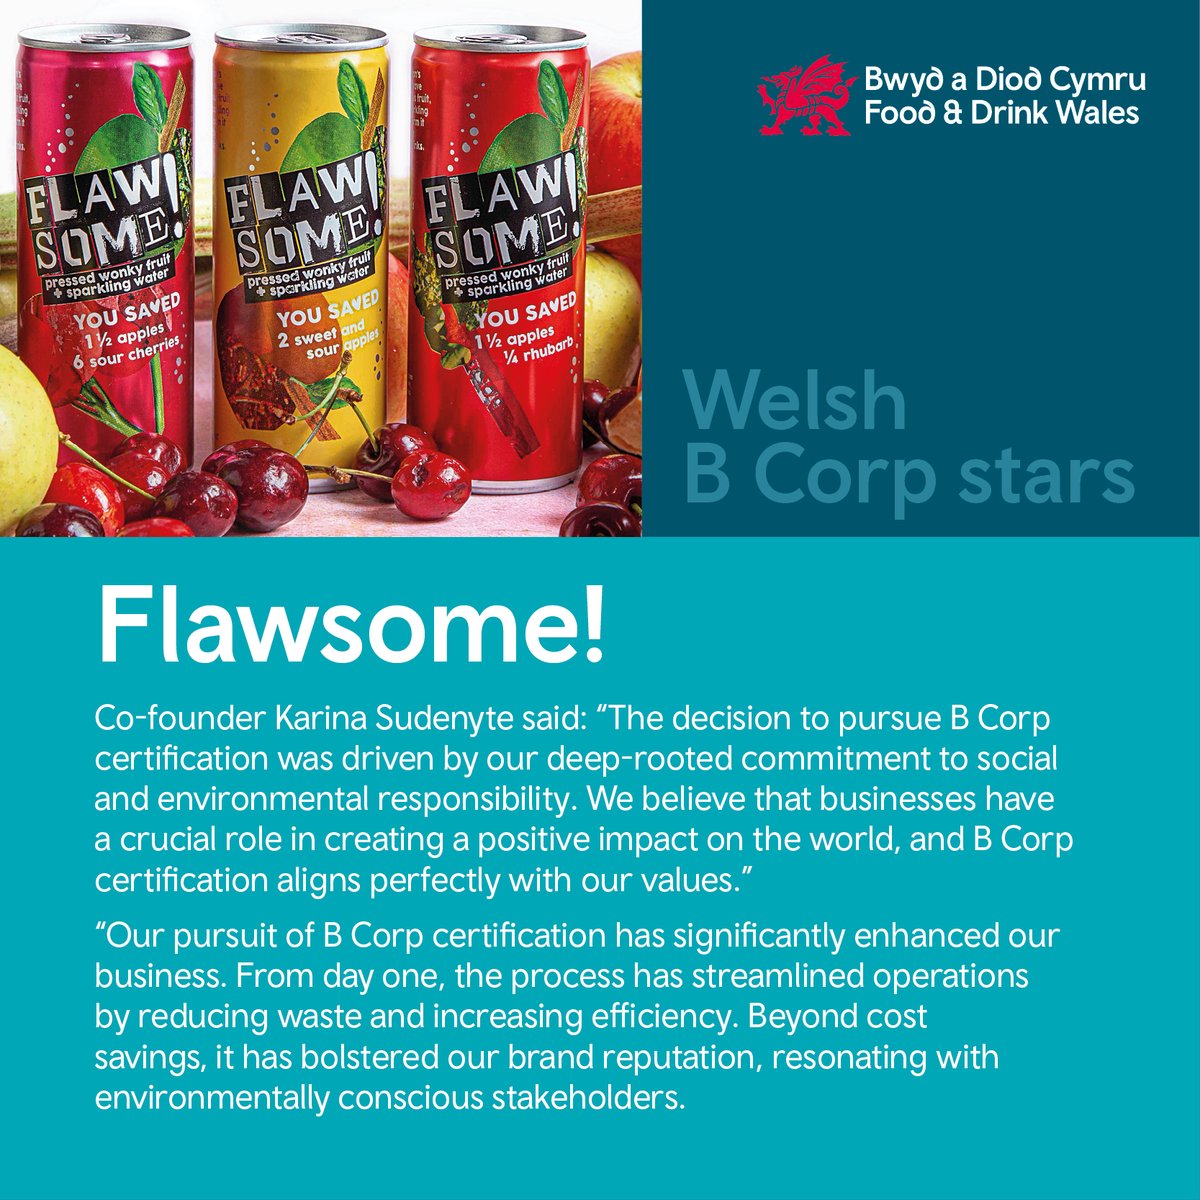 It’s #BCorpMonth We have a growing number of food & drink companies in Wales that have achieved B Corp certification. Join us in supporting these Welsh B Corp stars and their dedication to creating a more sustainable and equitable future for all. #FoodDrinkWales